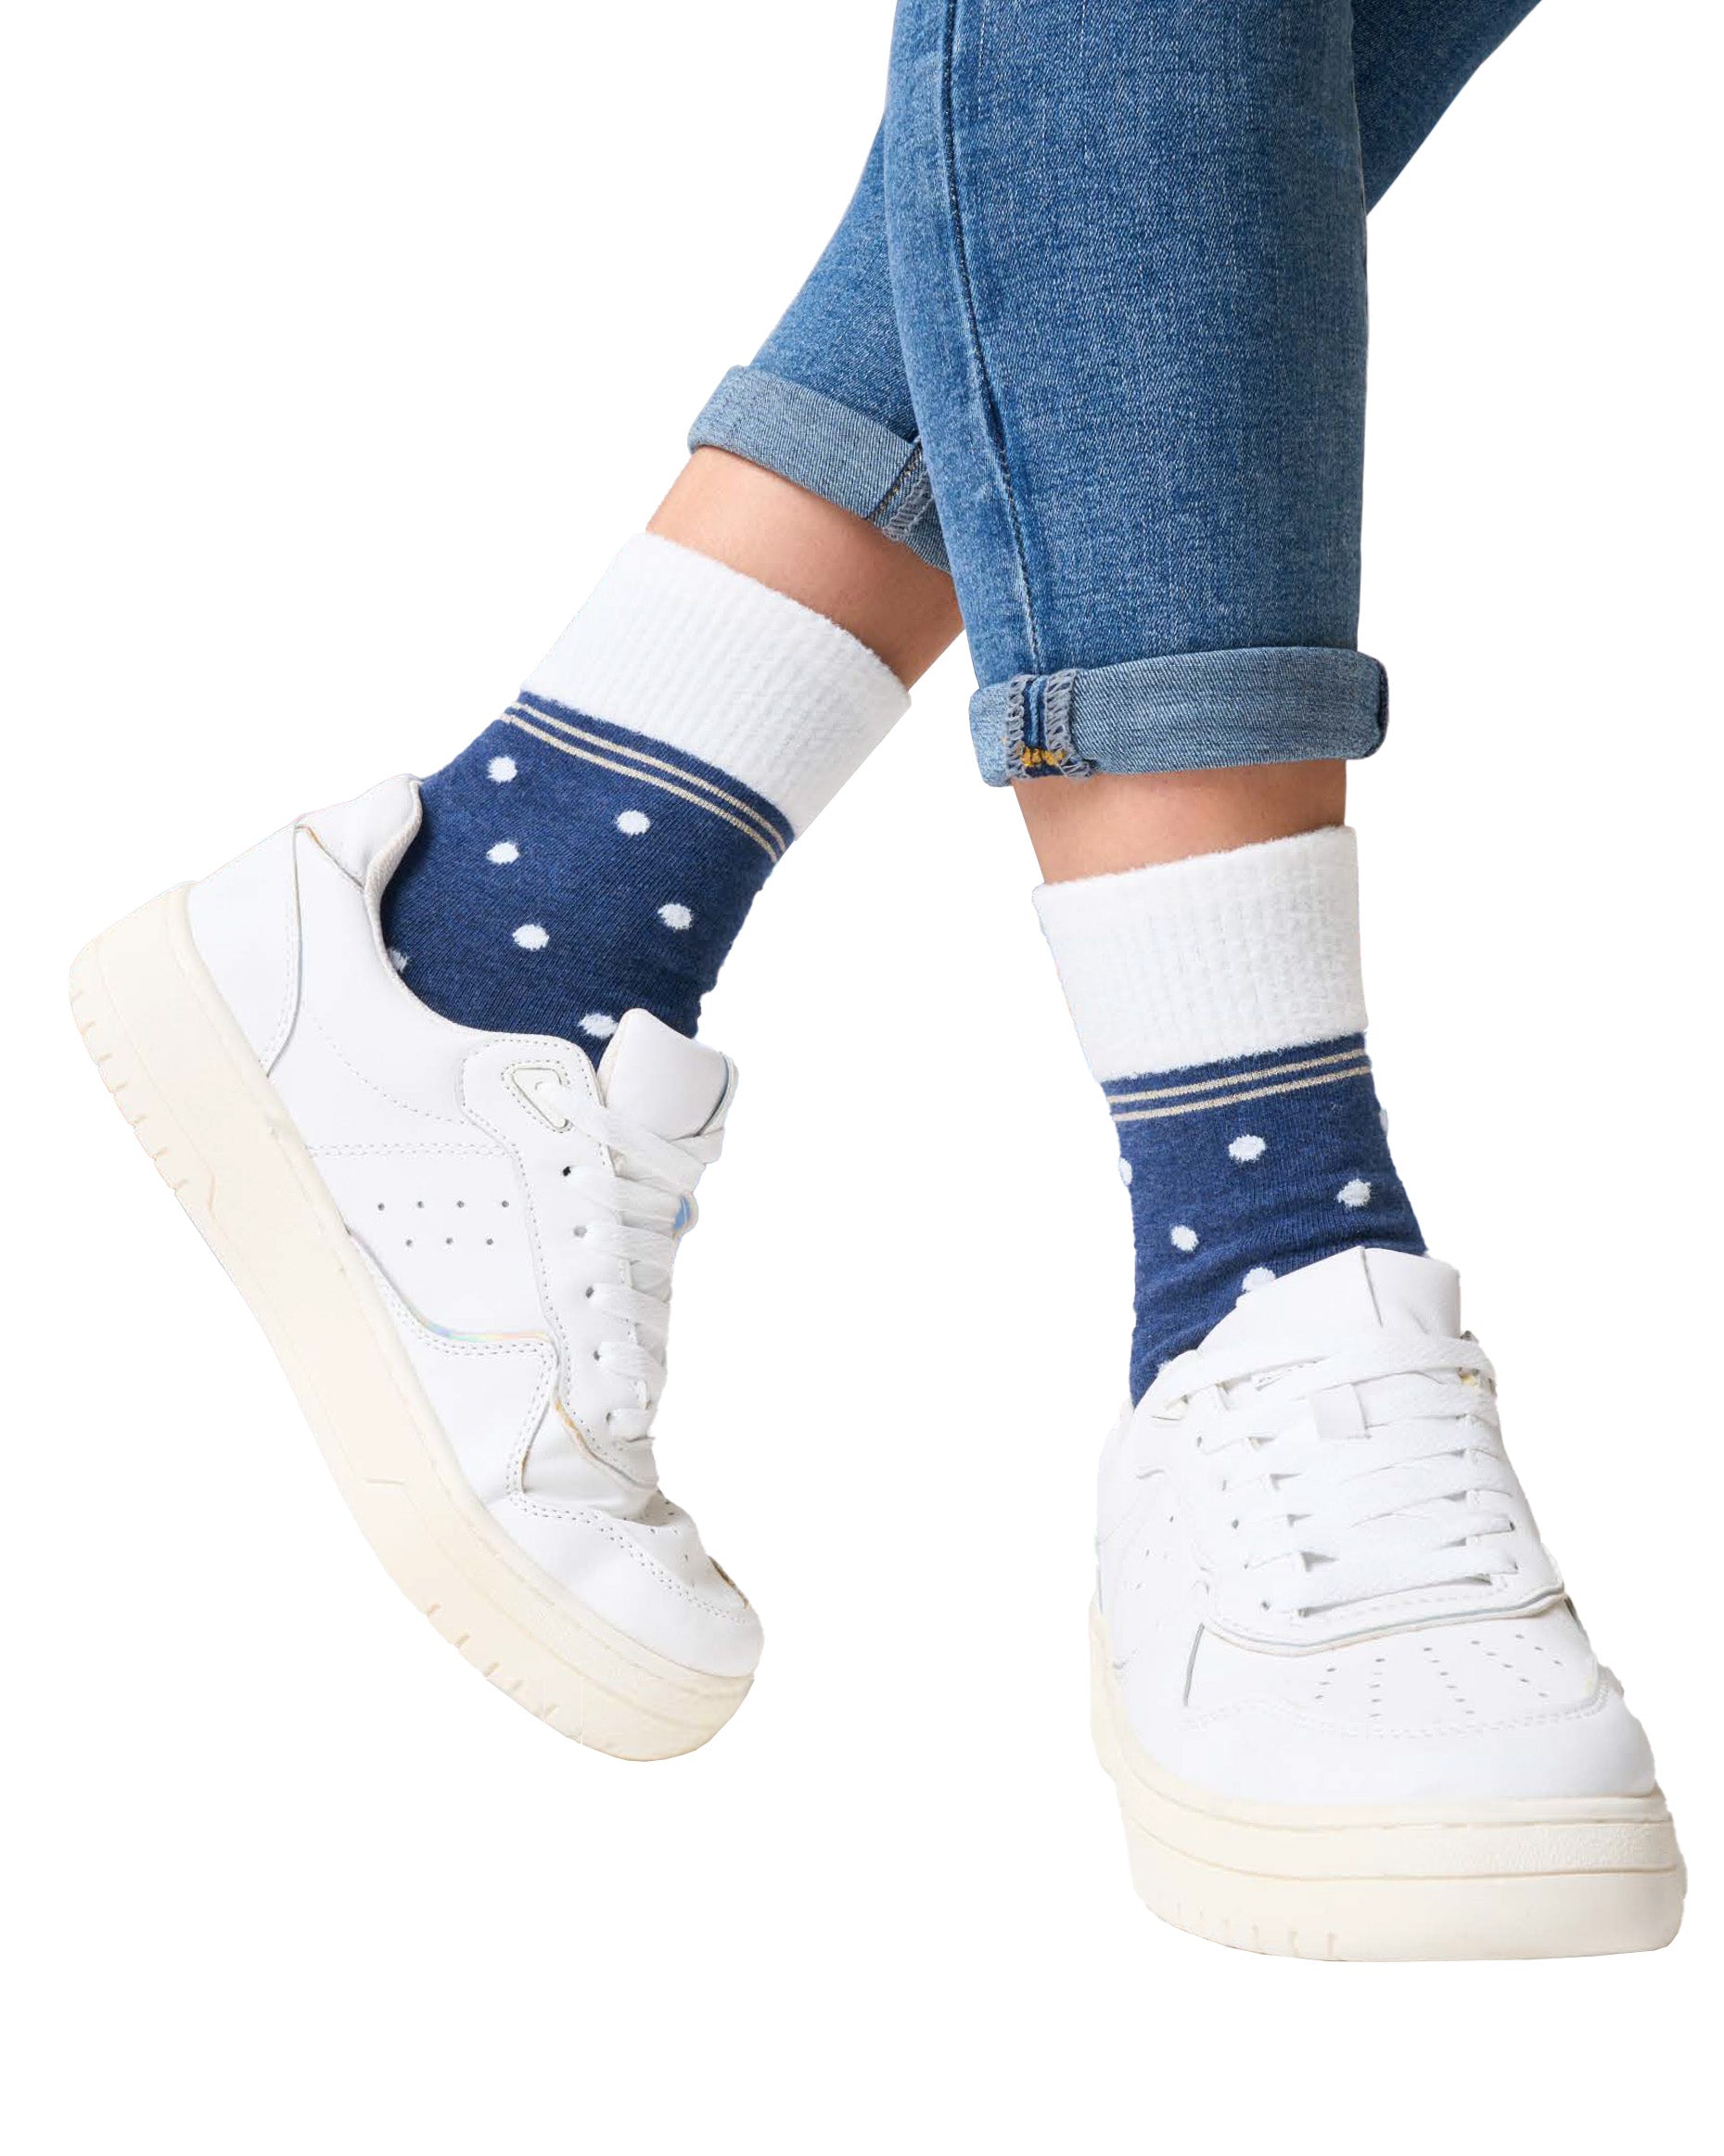 SiSi Puff Calzino - Denim blue cotton mix ankle socks with a contrasting cream fluffy faux fur polka dot pattern, double faux fur cuff with gold lamé stripe.